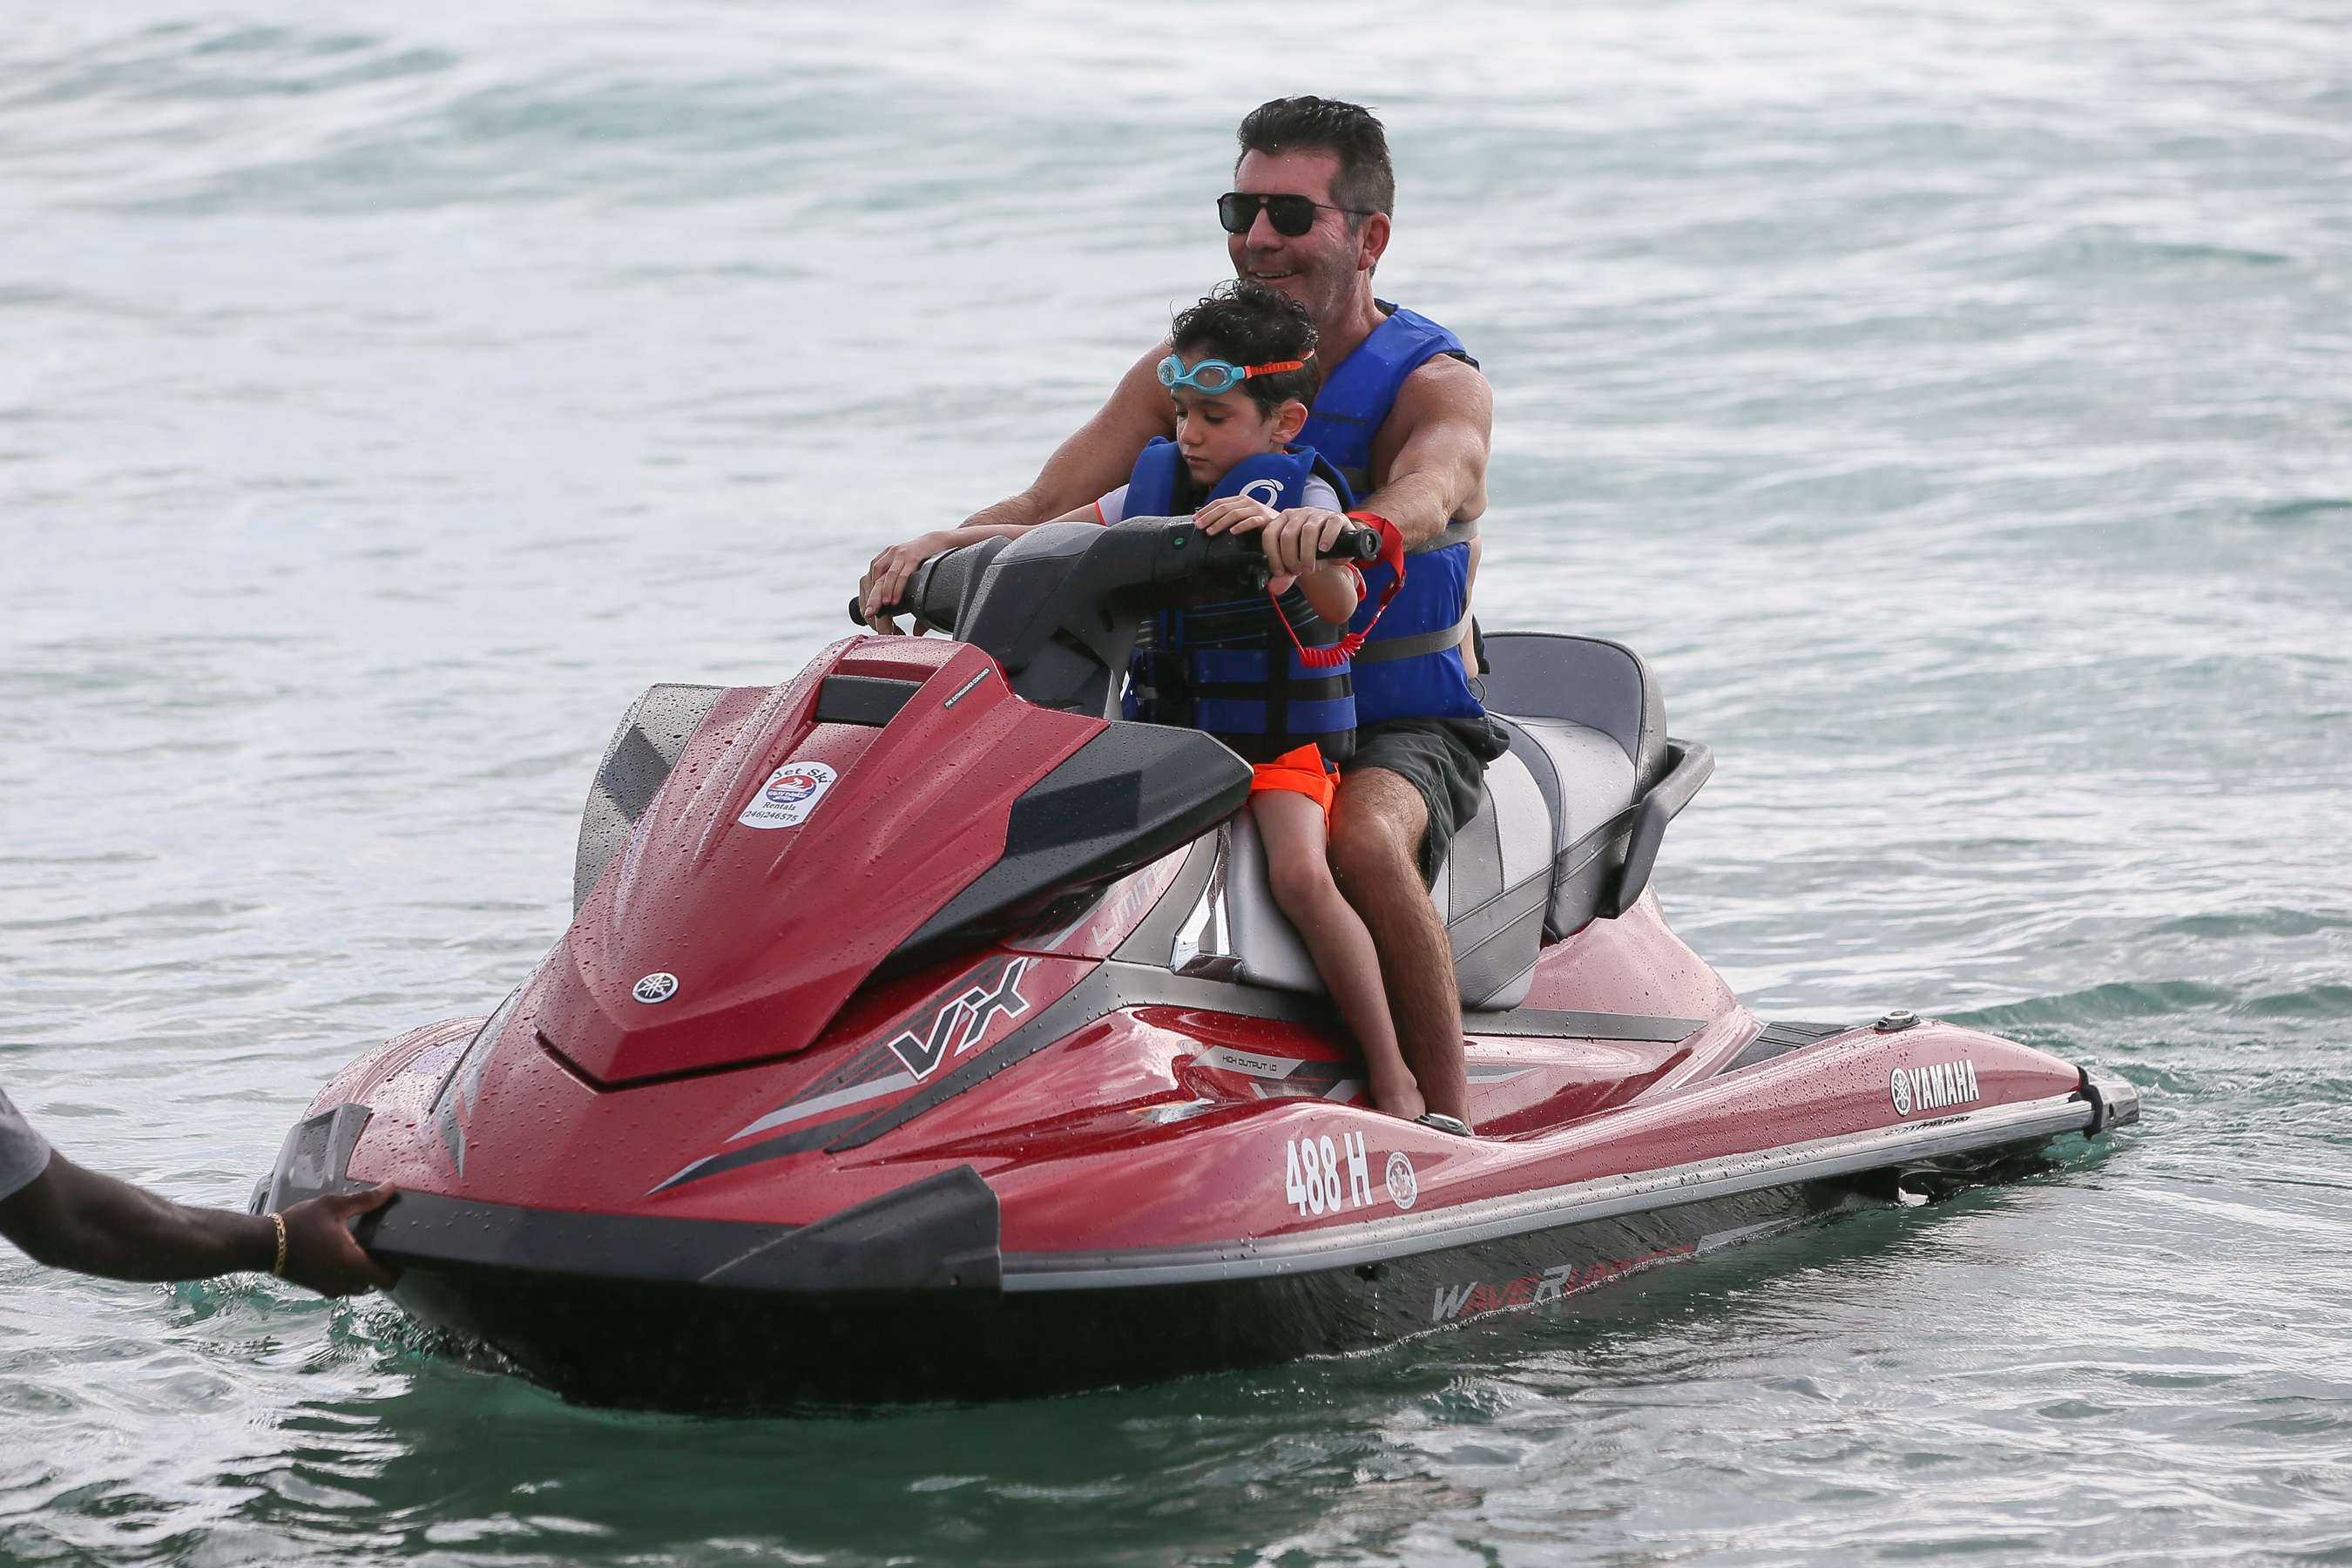 Simon Cowell is seen jet skiing with his son Eric, on December 18, 2019, in Bridgetown, Barbados. | Source: Getty Images